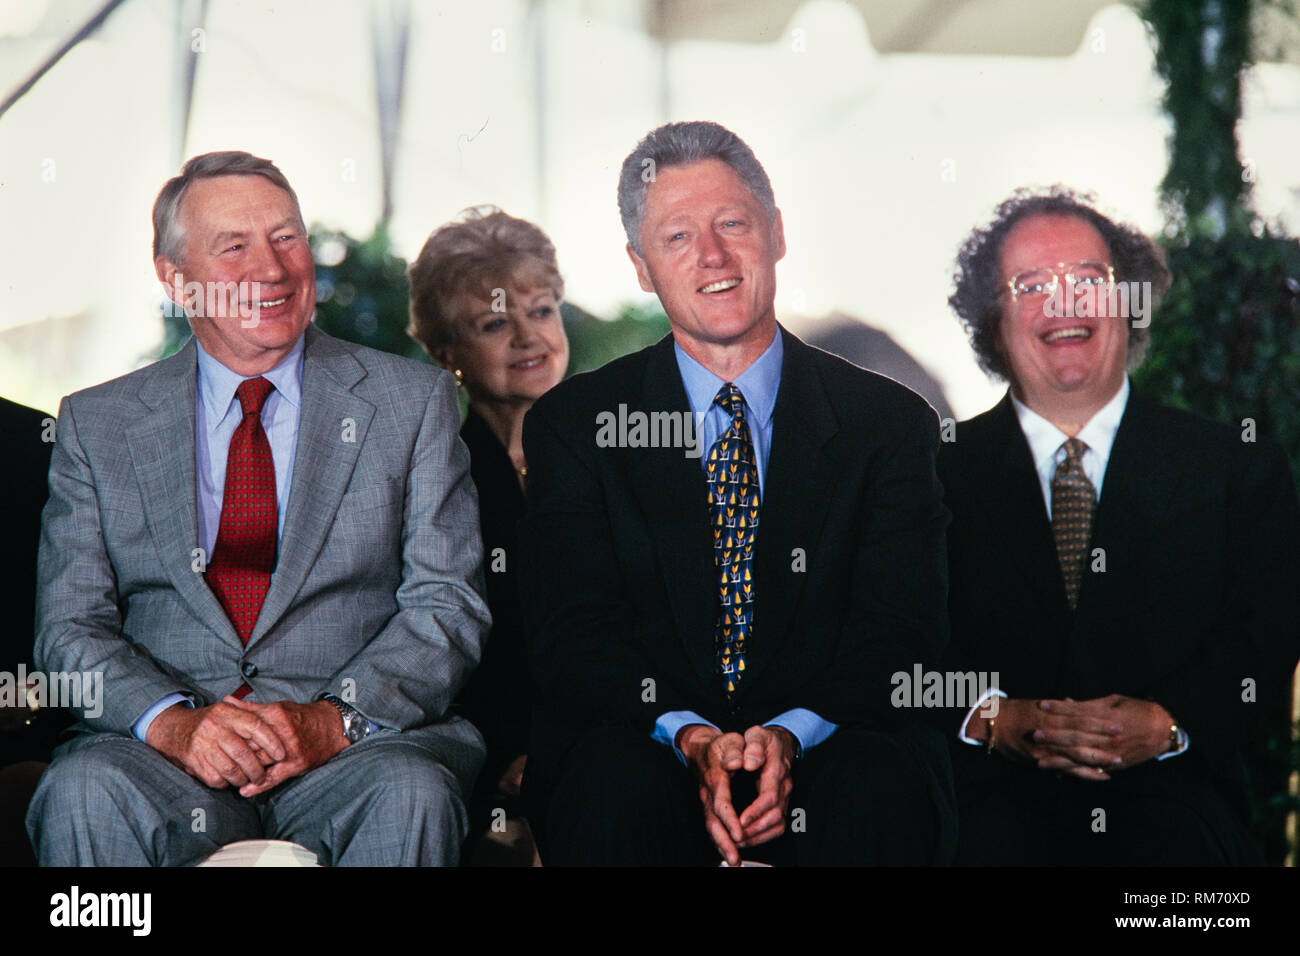 U.S. President Bill Clinton sits with Journalist Robert MacNeil, left, and Music Director of the Metropolitan Opera James Levine, right, during the National Medal of Arts and Humanities awards during a ceremony on the South Lawn of the White House September 29, 1997 in Washington, DC. Stock Photo